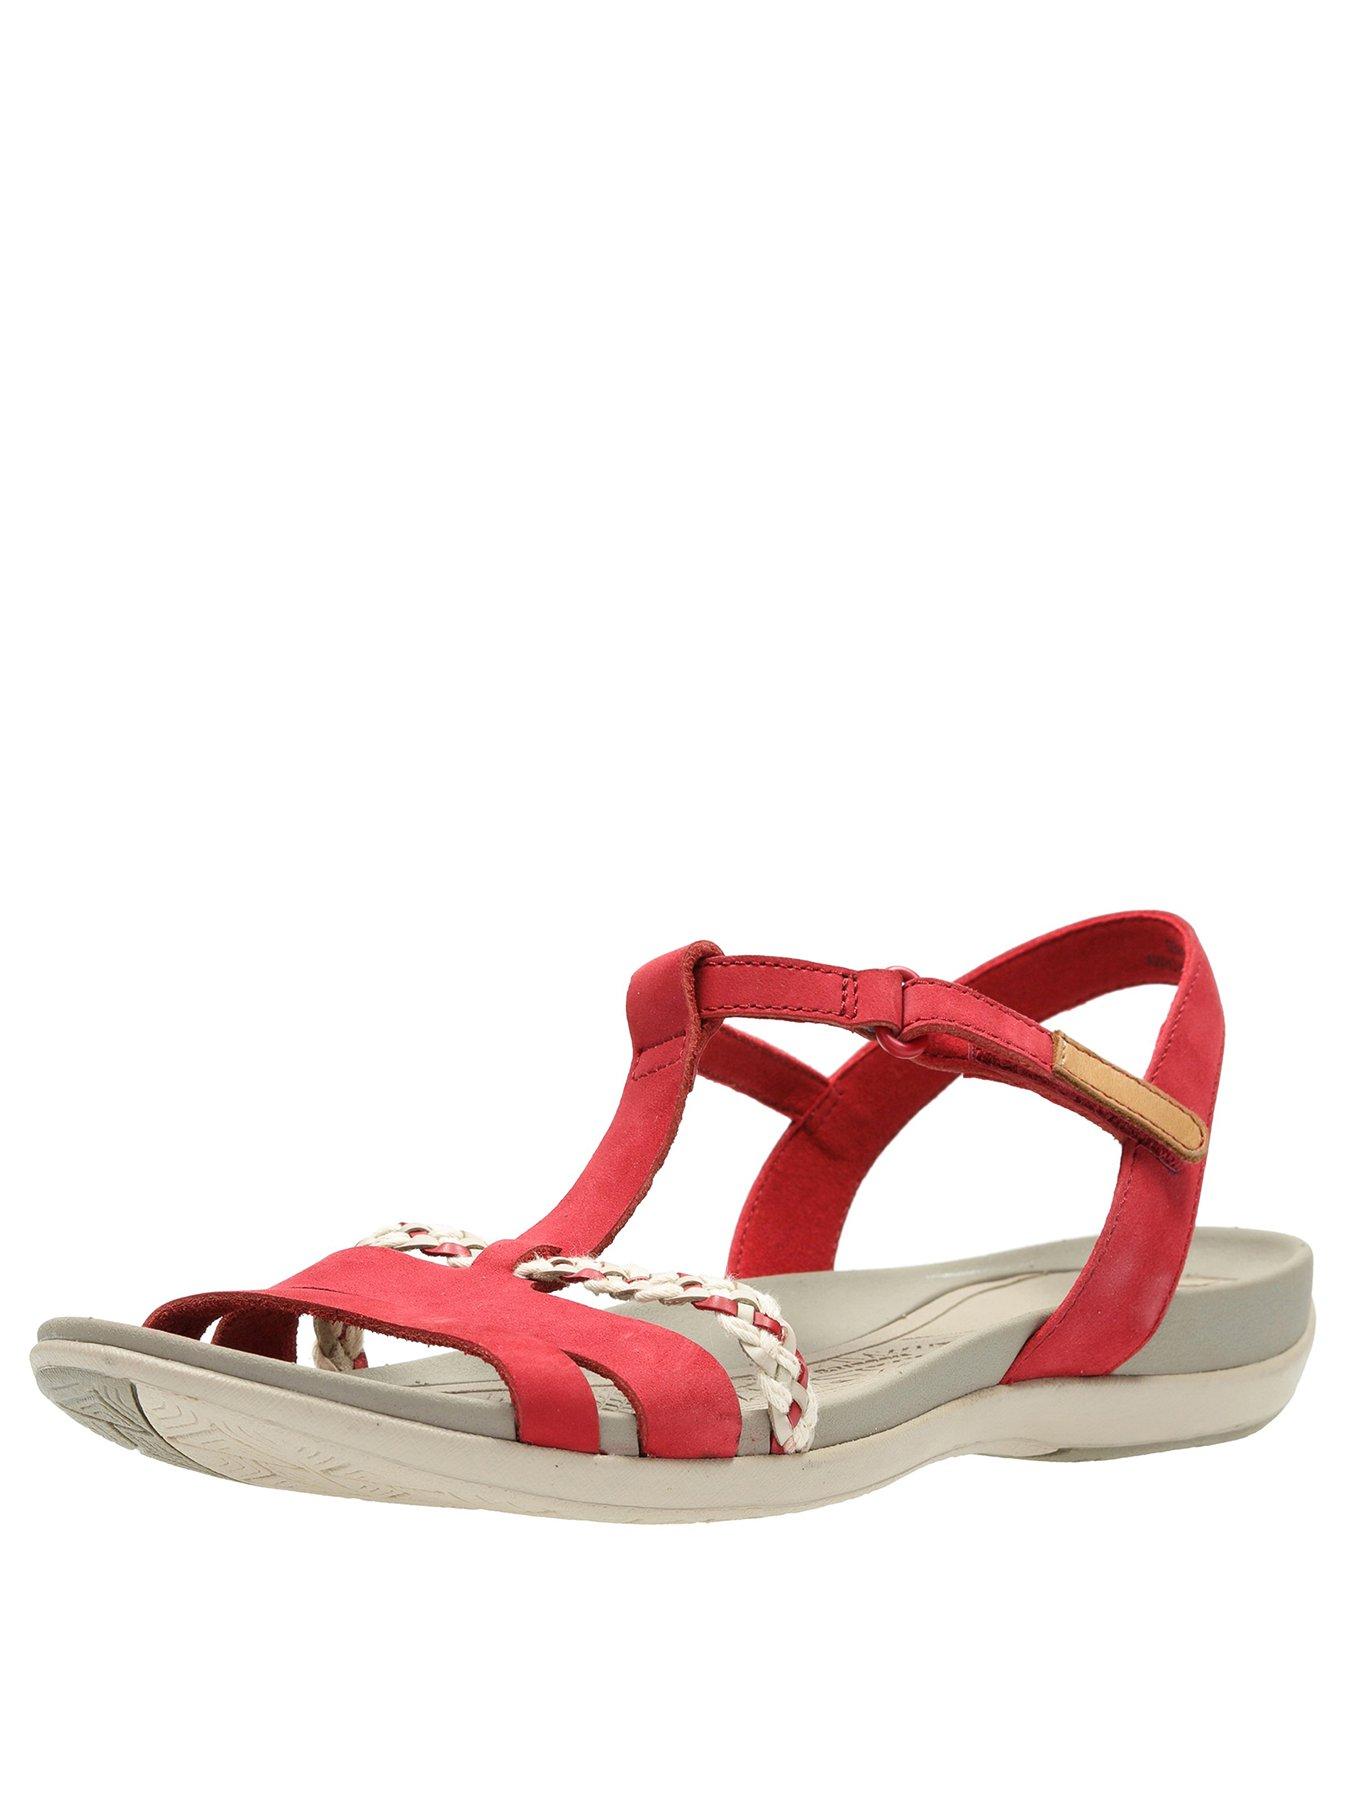 clarks sandals clearance